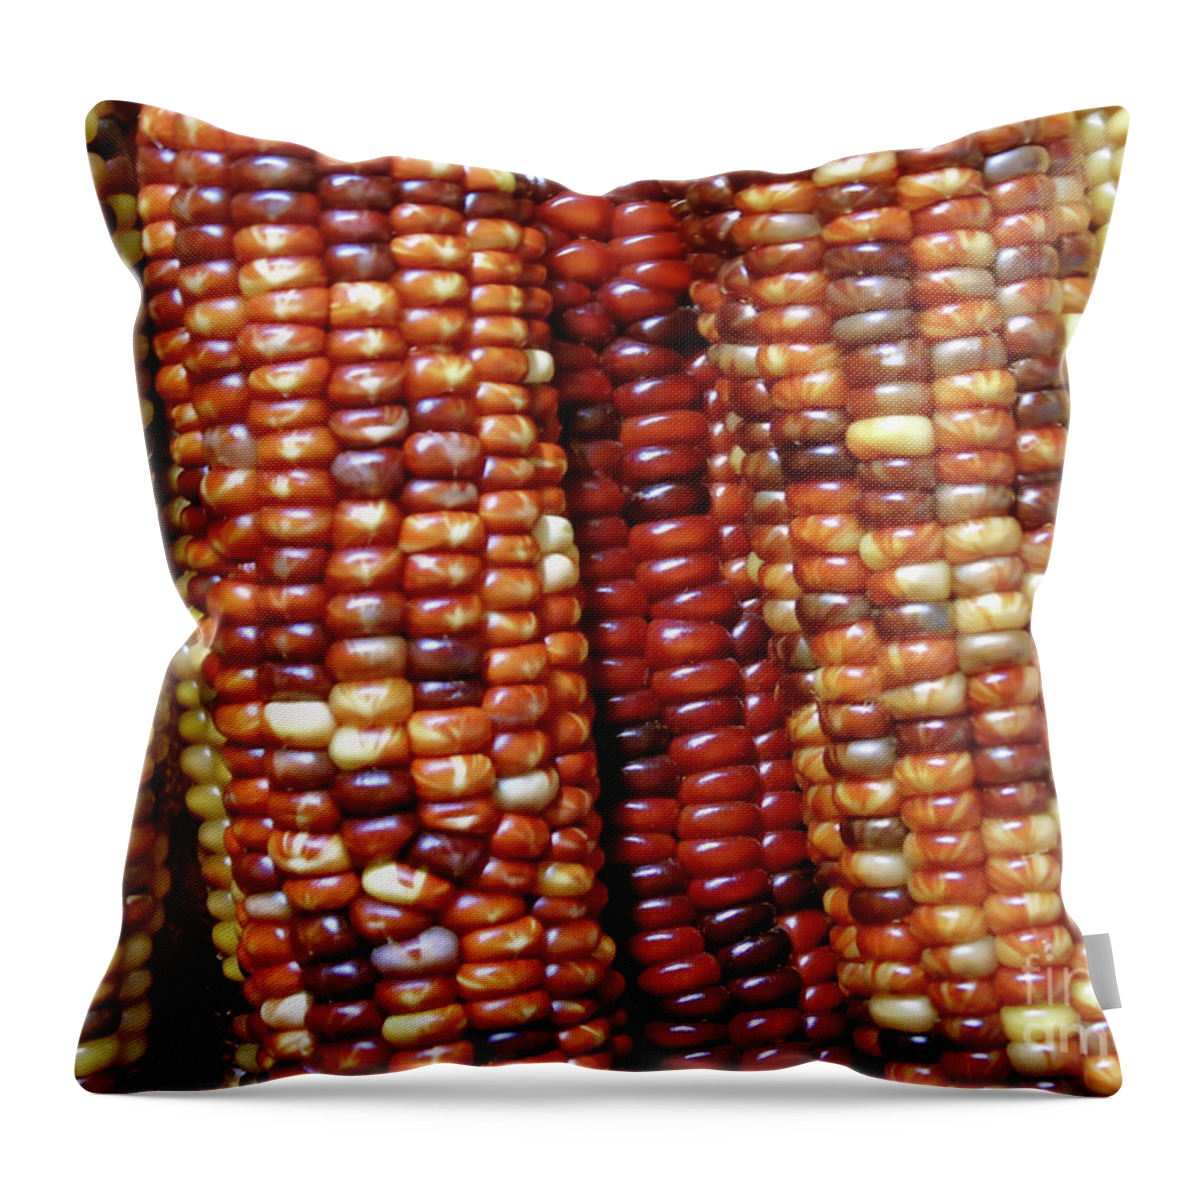 Corn Throw Pillow featuring the photograph Indian Corn by D Hackett